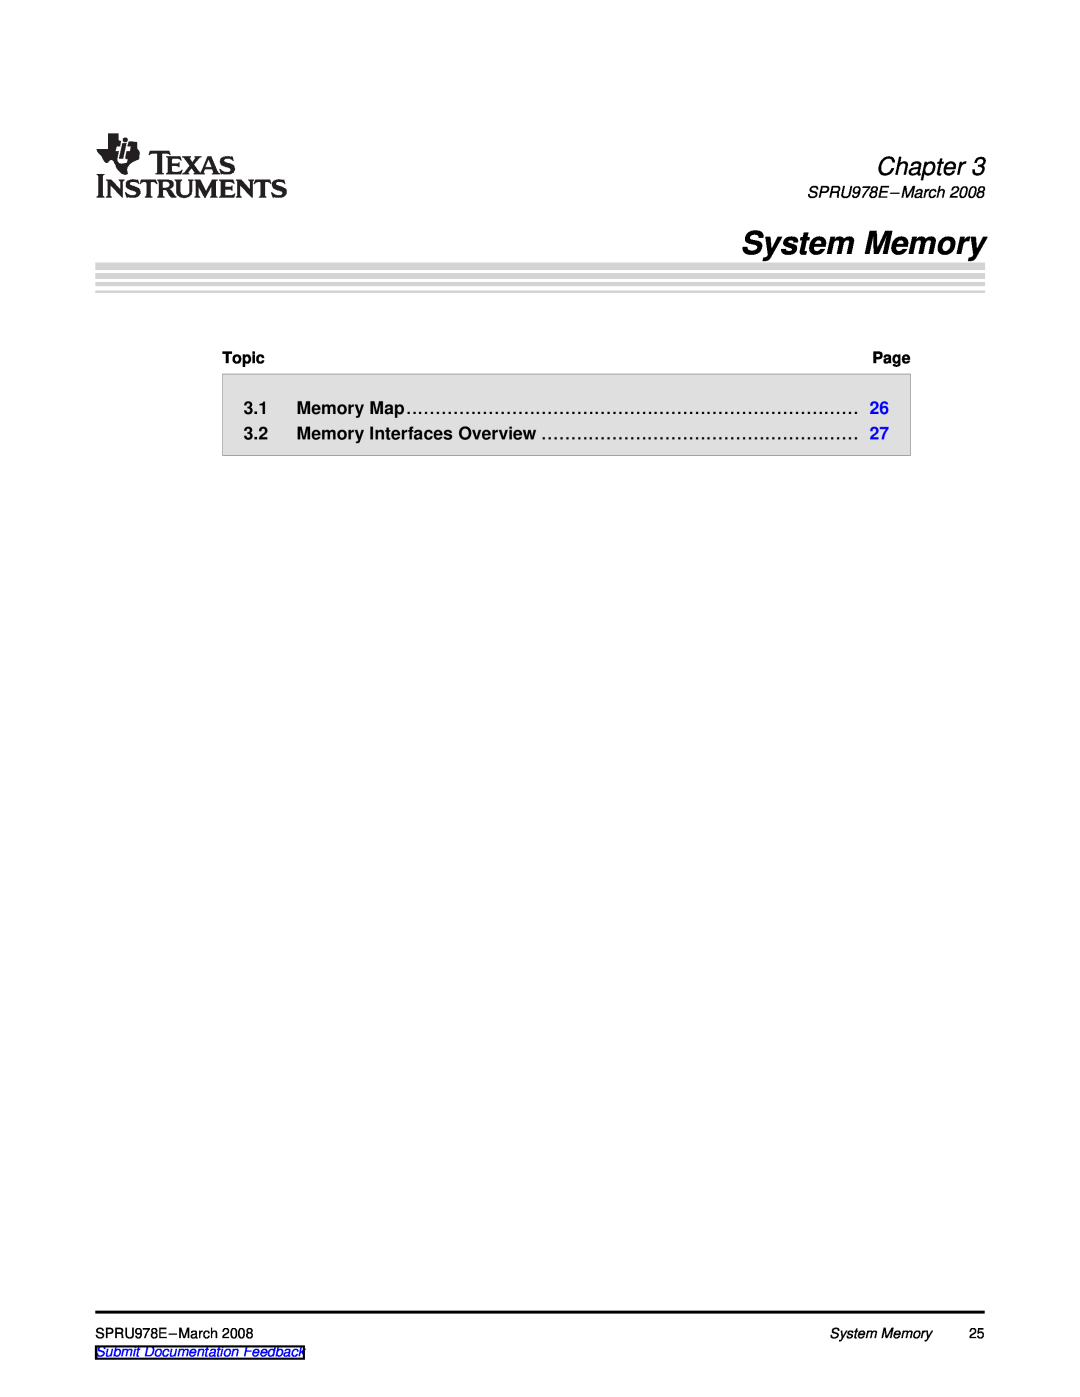 Texas Instruments TMS320DM643x System Memory, Memory Map, Memory Interfaces Overview, Chapter, SPRU978E-March, Topic, Page 